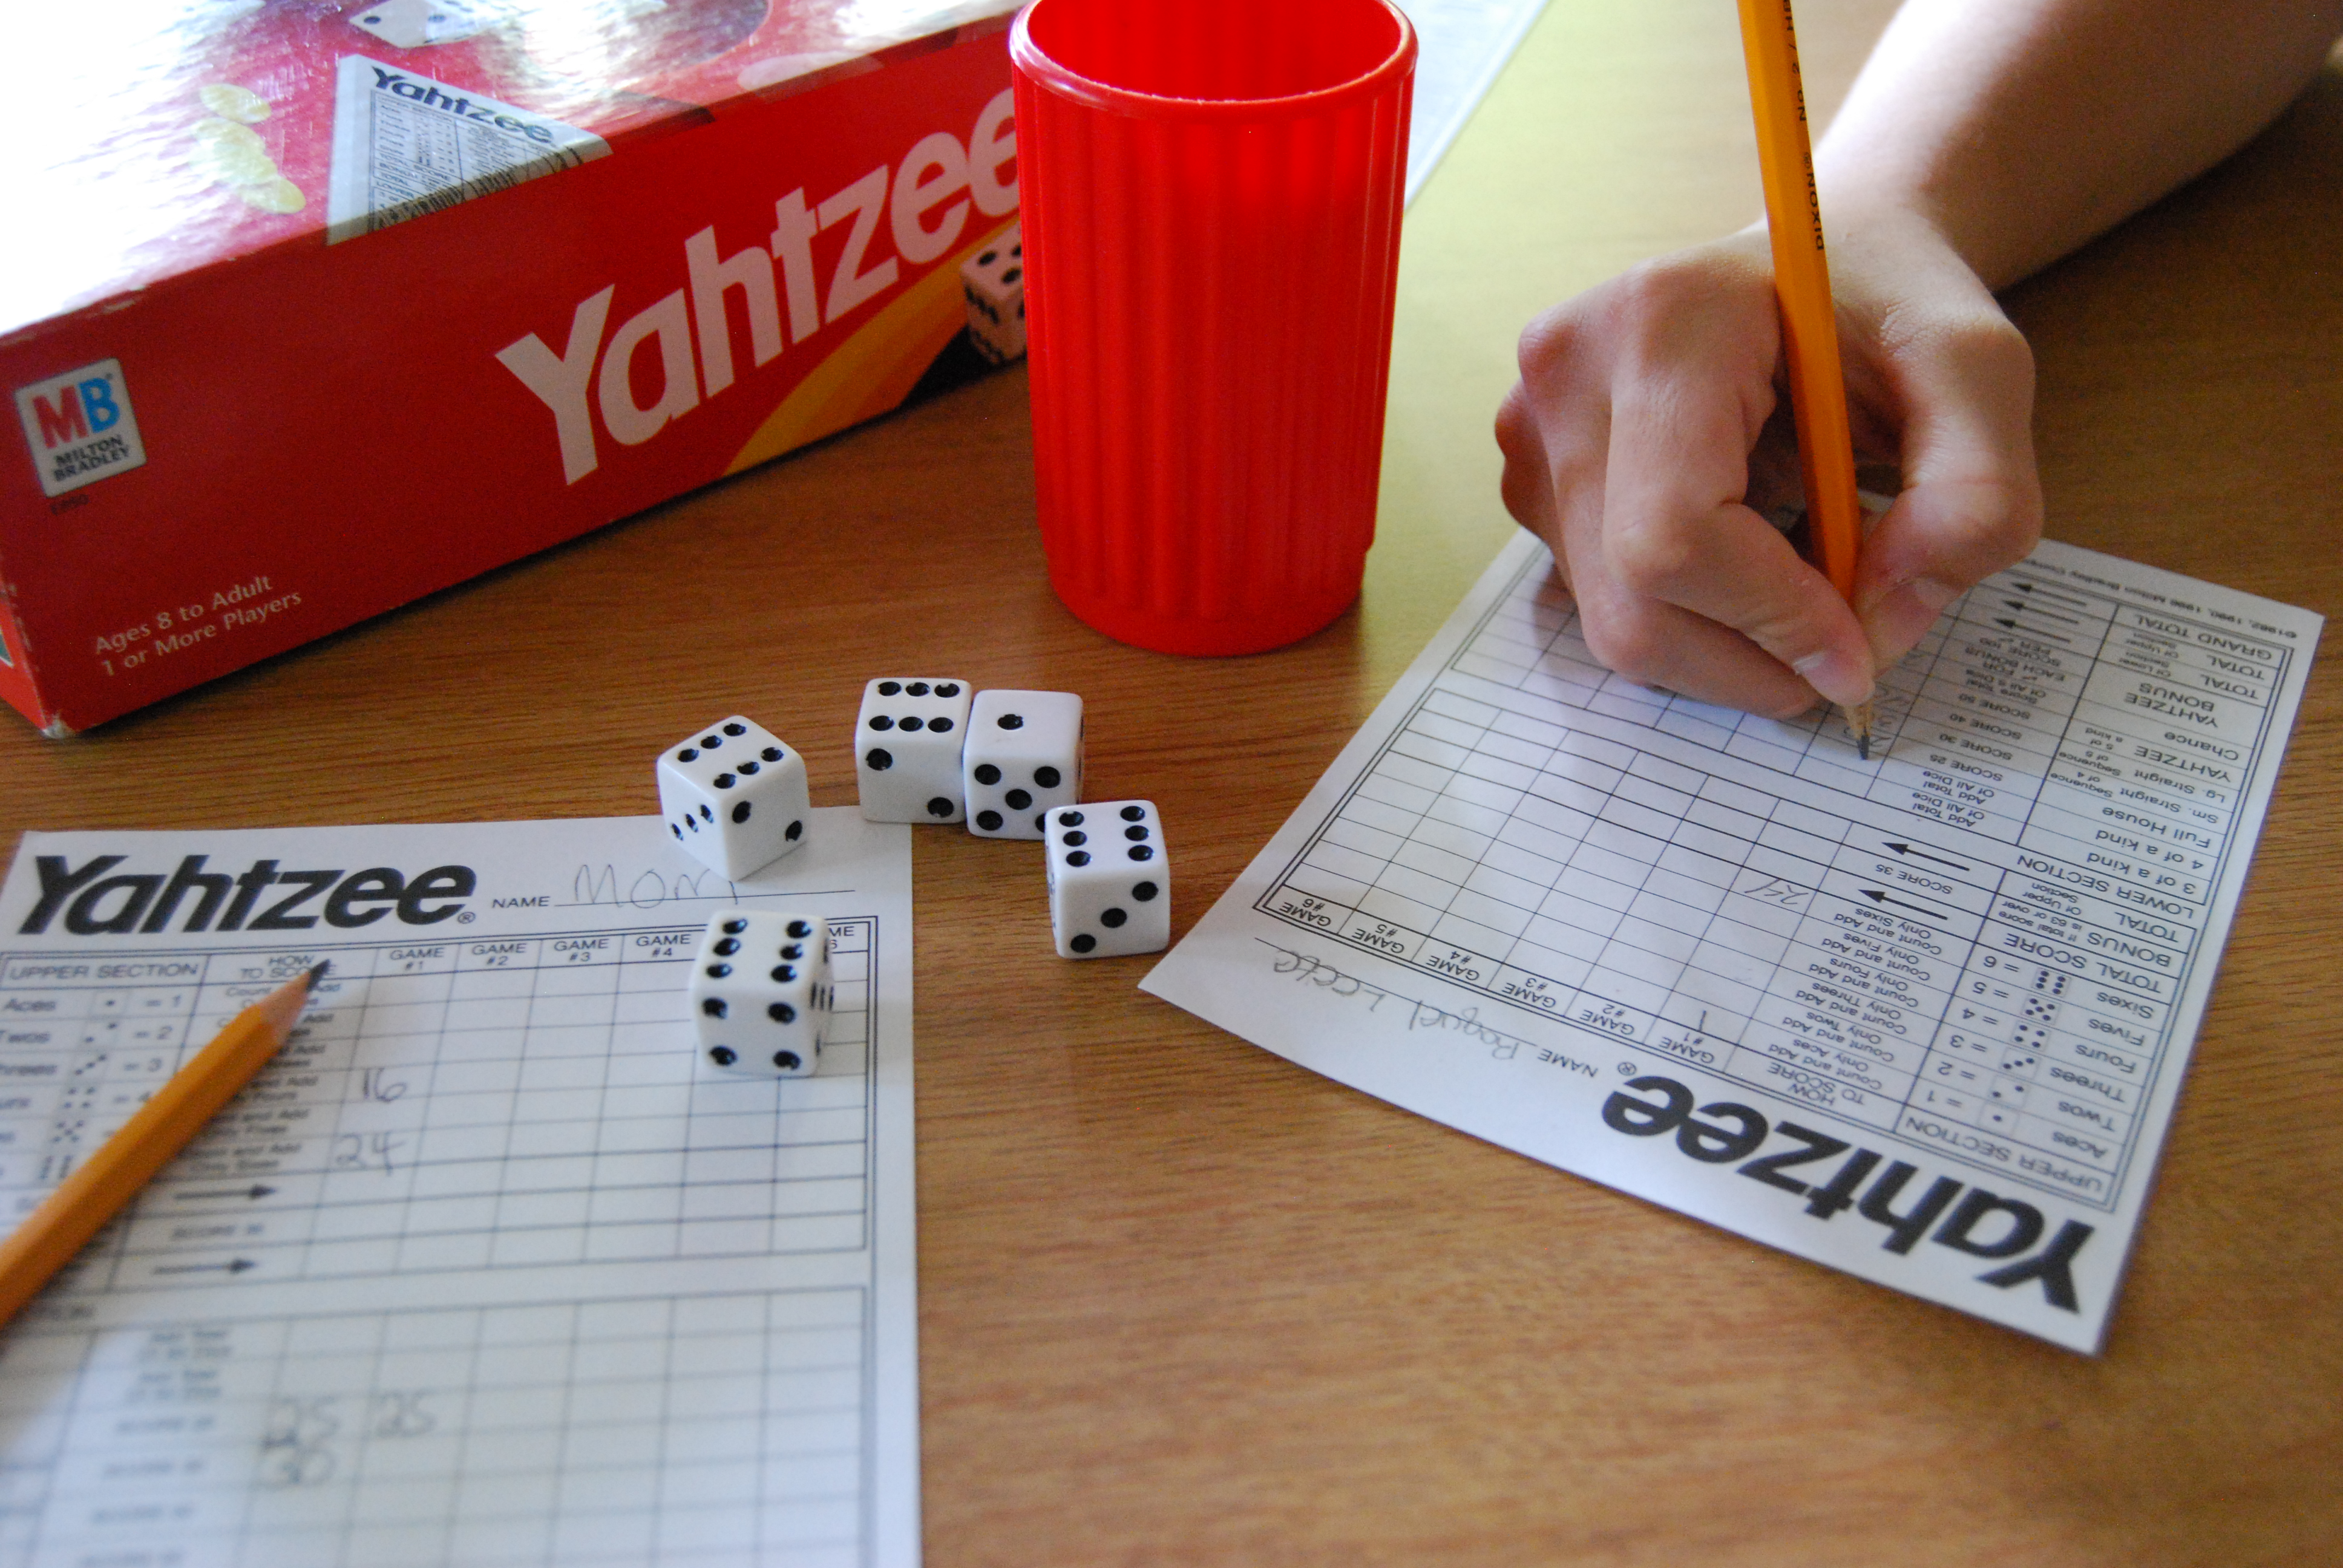 Play yahtzee free unlimited games